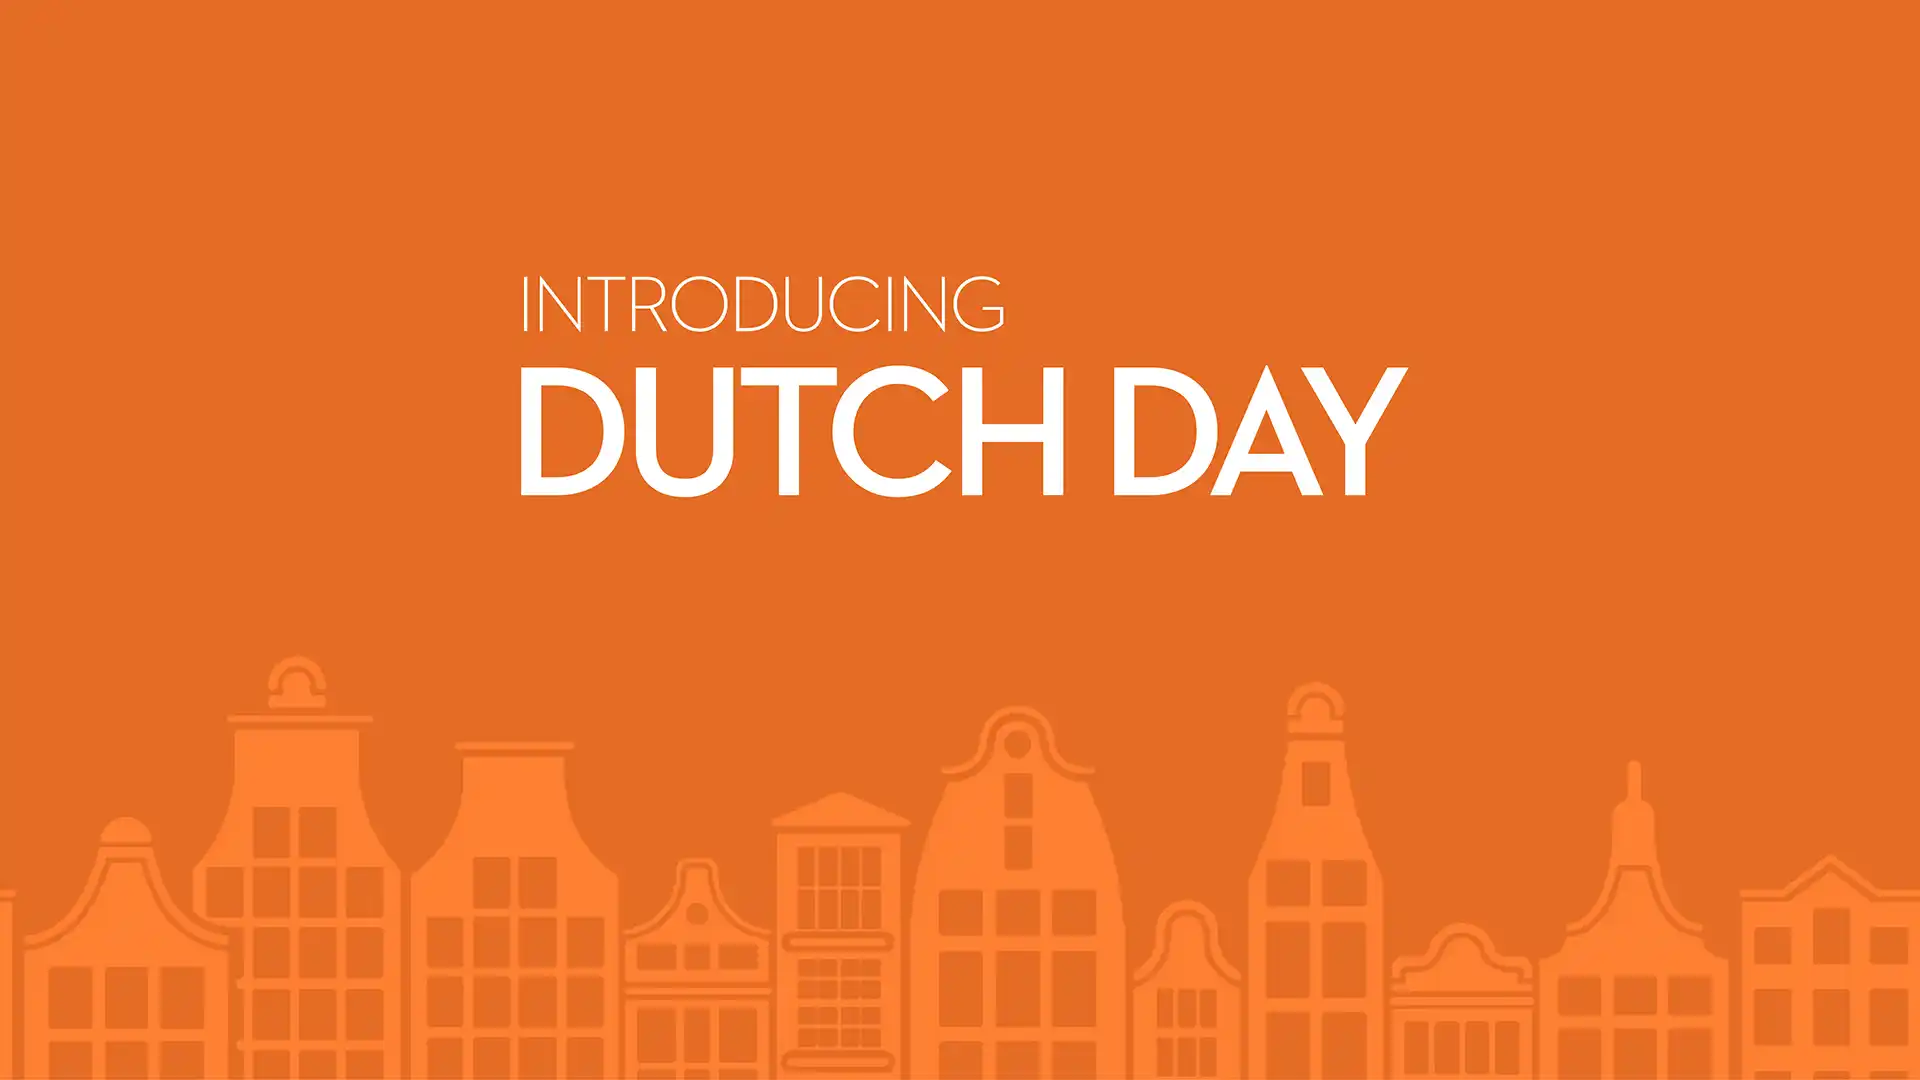 Post: Celebrate Our Heritage Through Dutch Day On Board